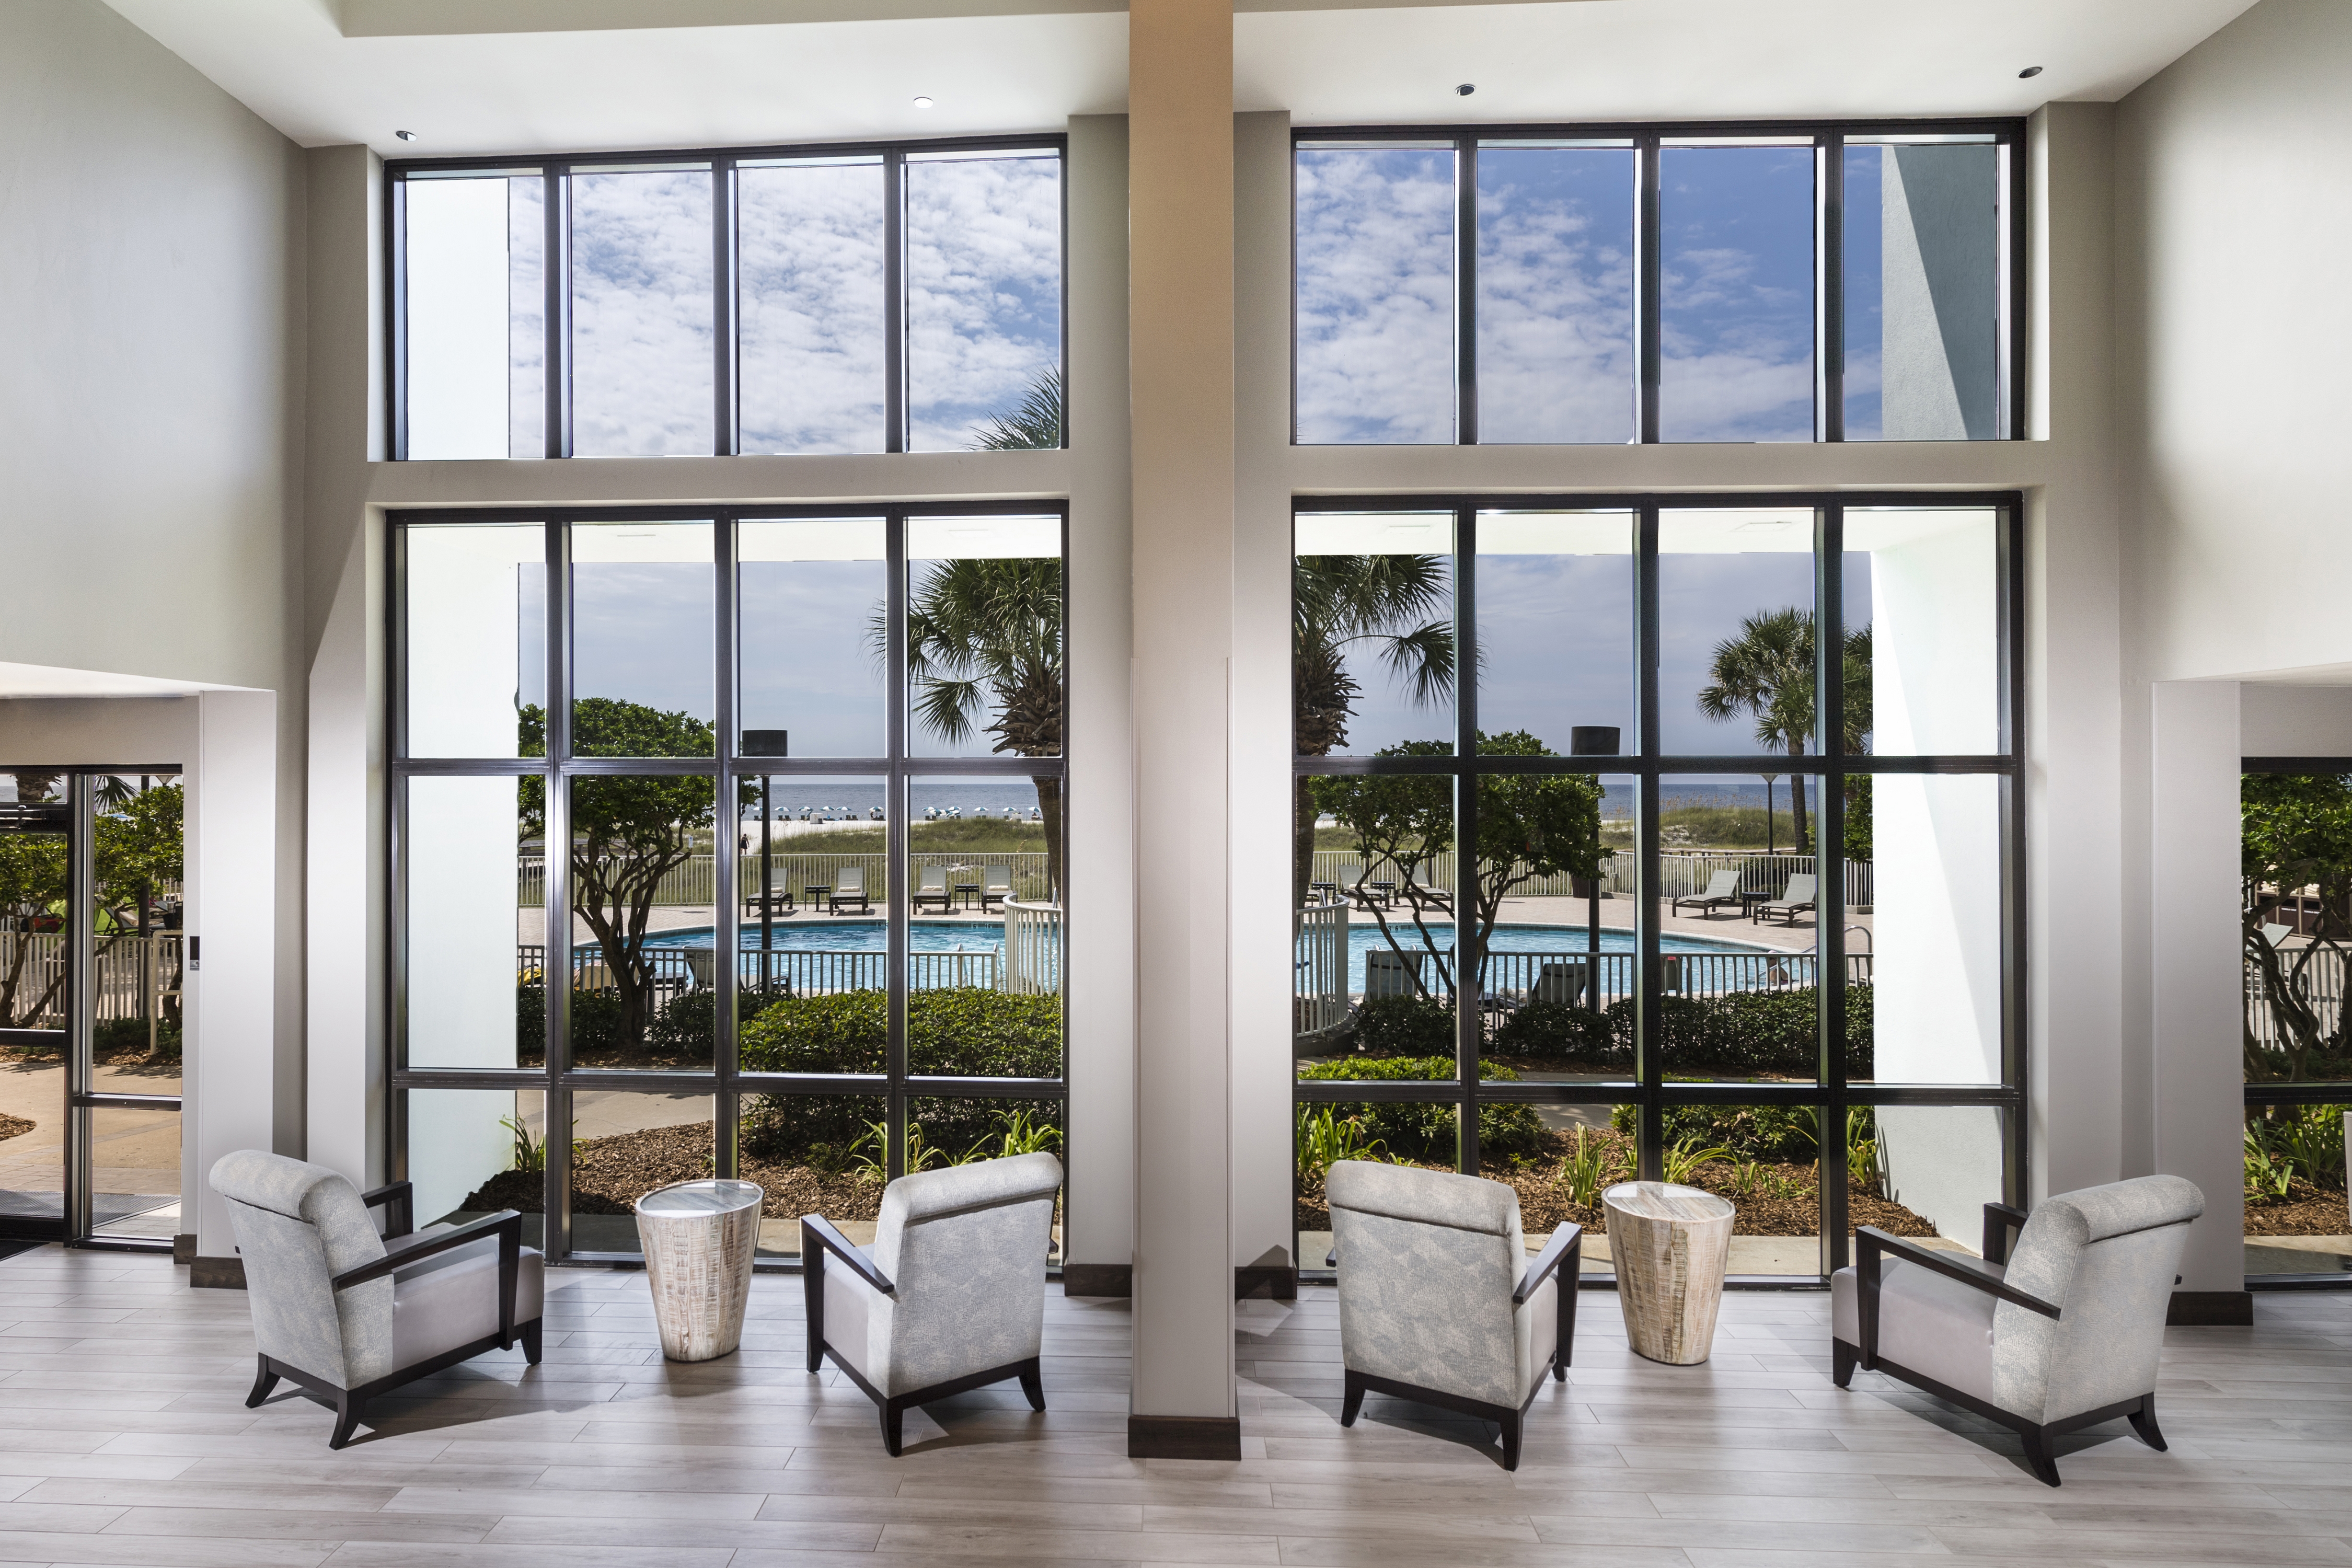 Rear View of Chairs and Tables in the Lobby that Face the Window with a View of the Pool and Beach